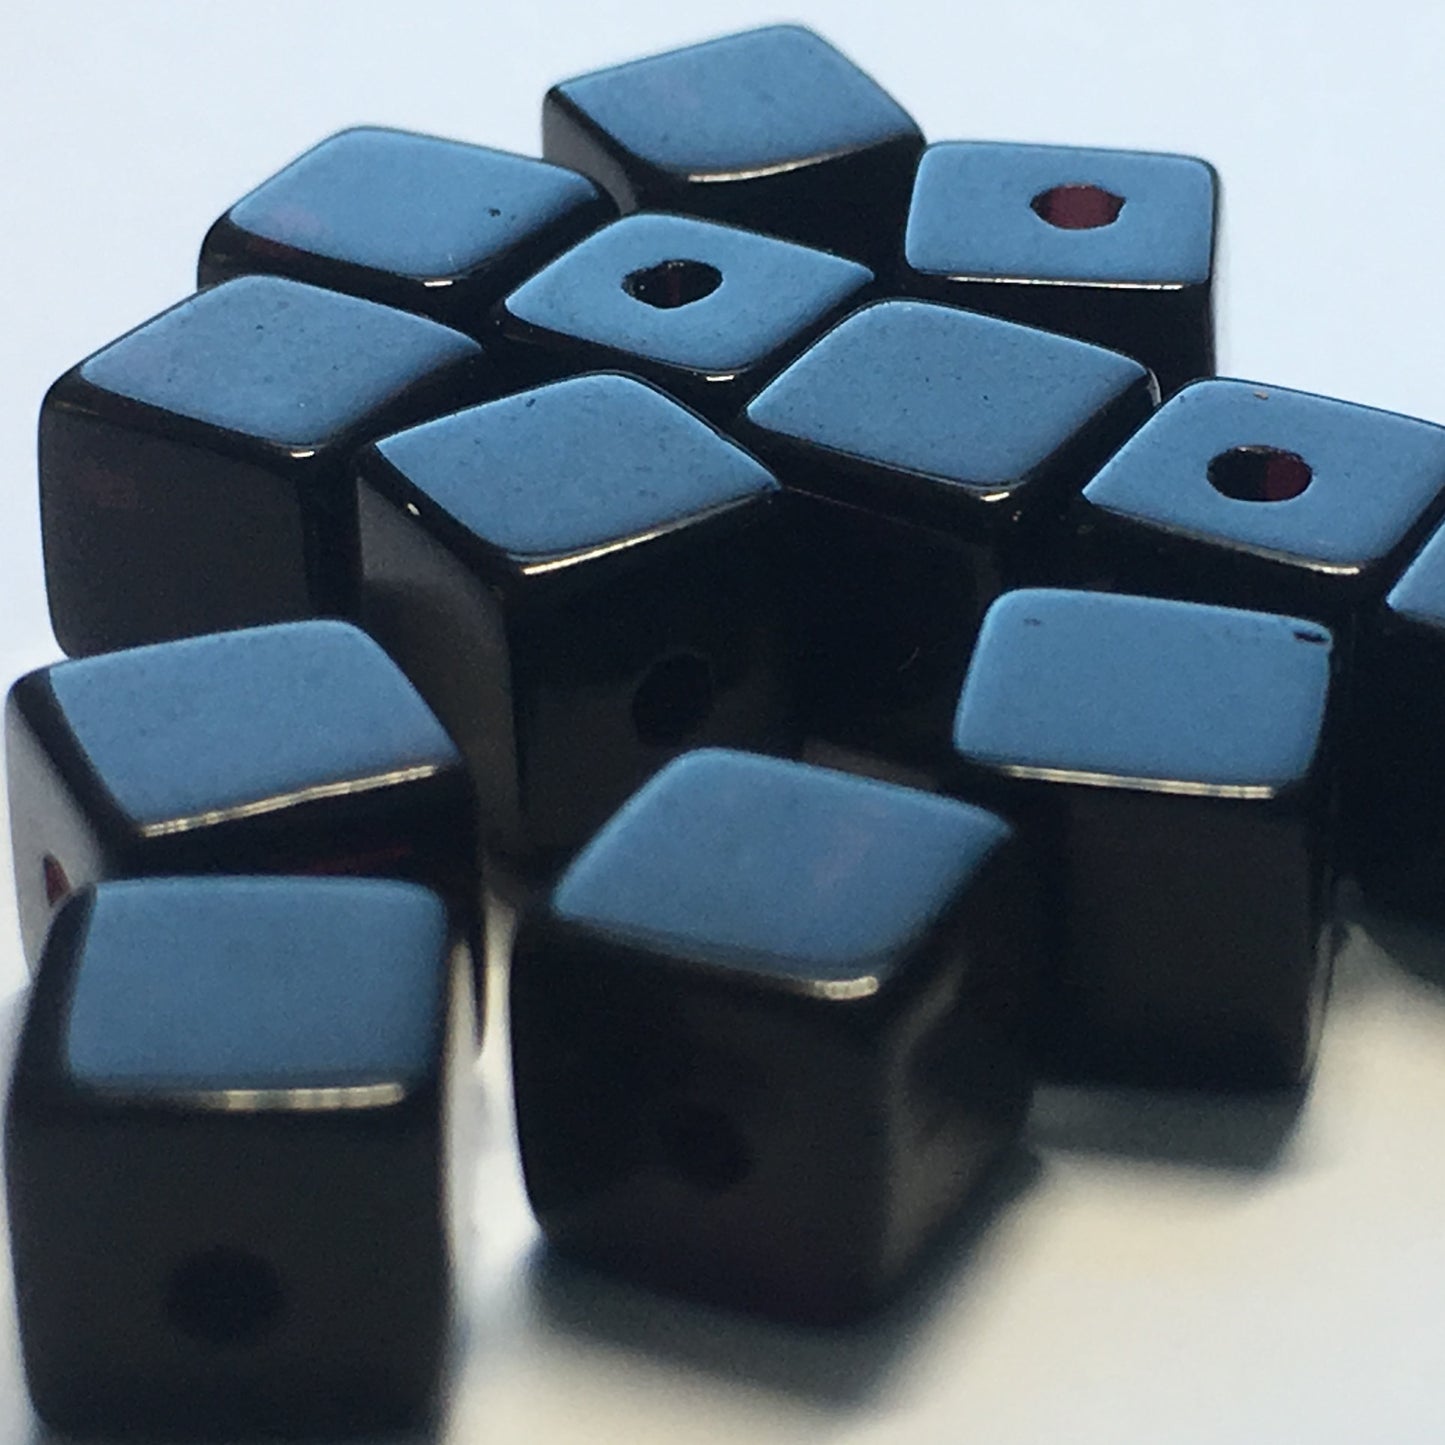 Opaque Black Glass Cube / Square Beads, 6 mm - 14 Beads